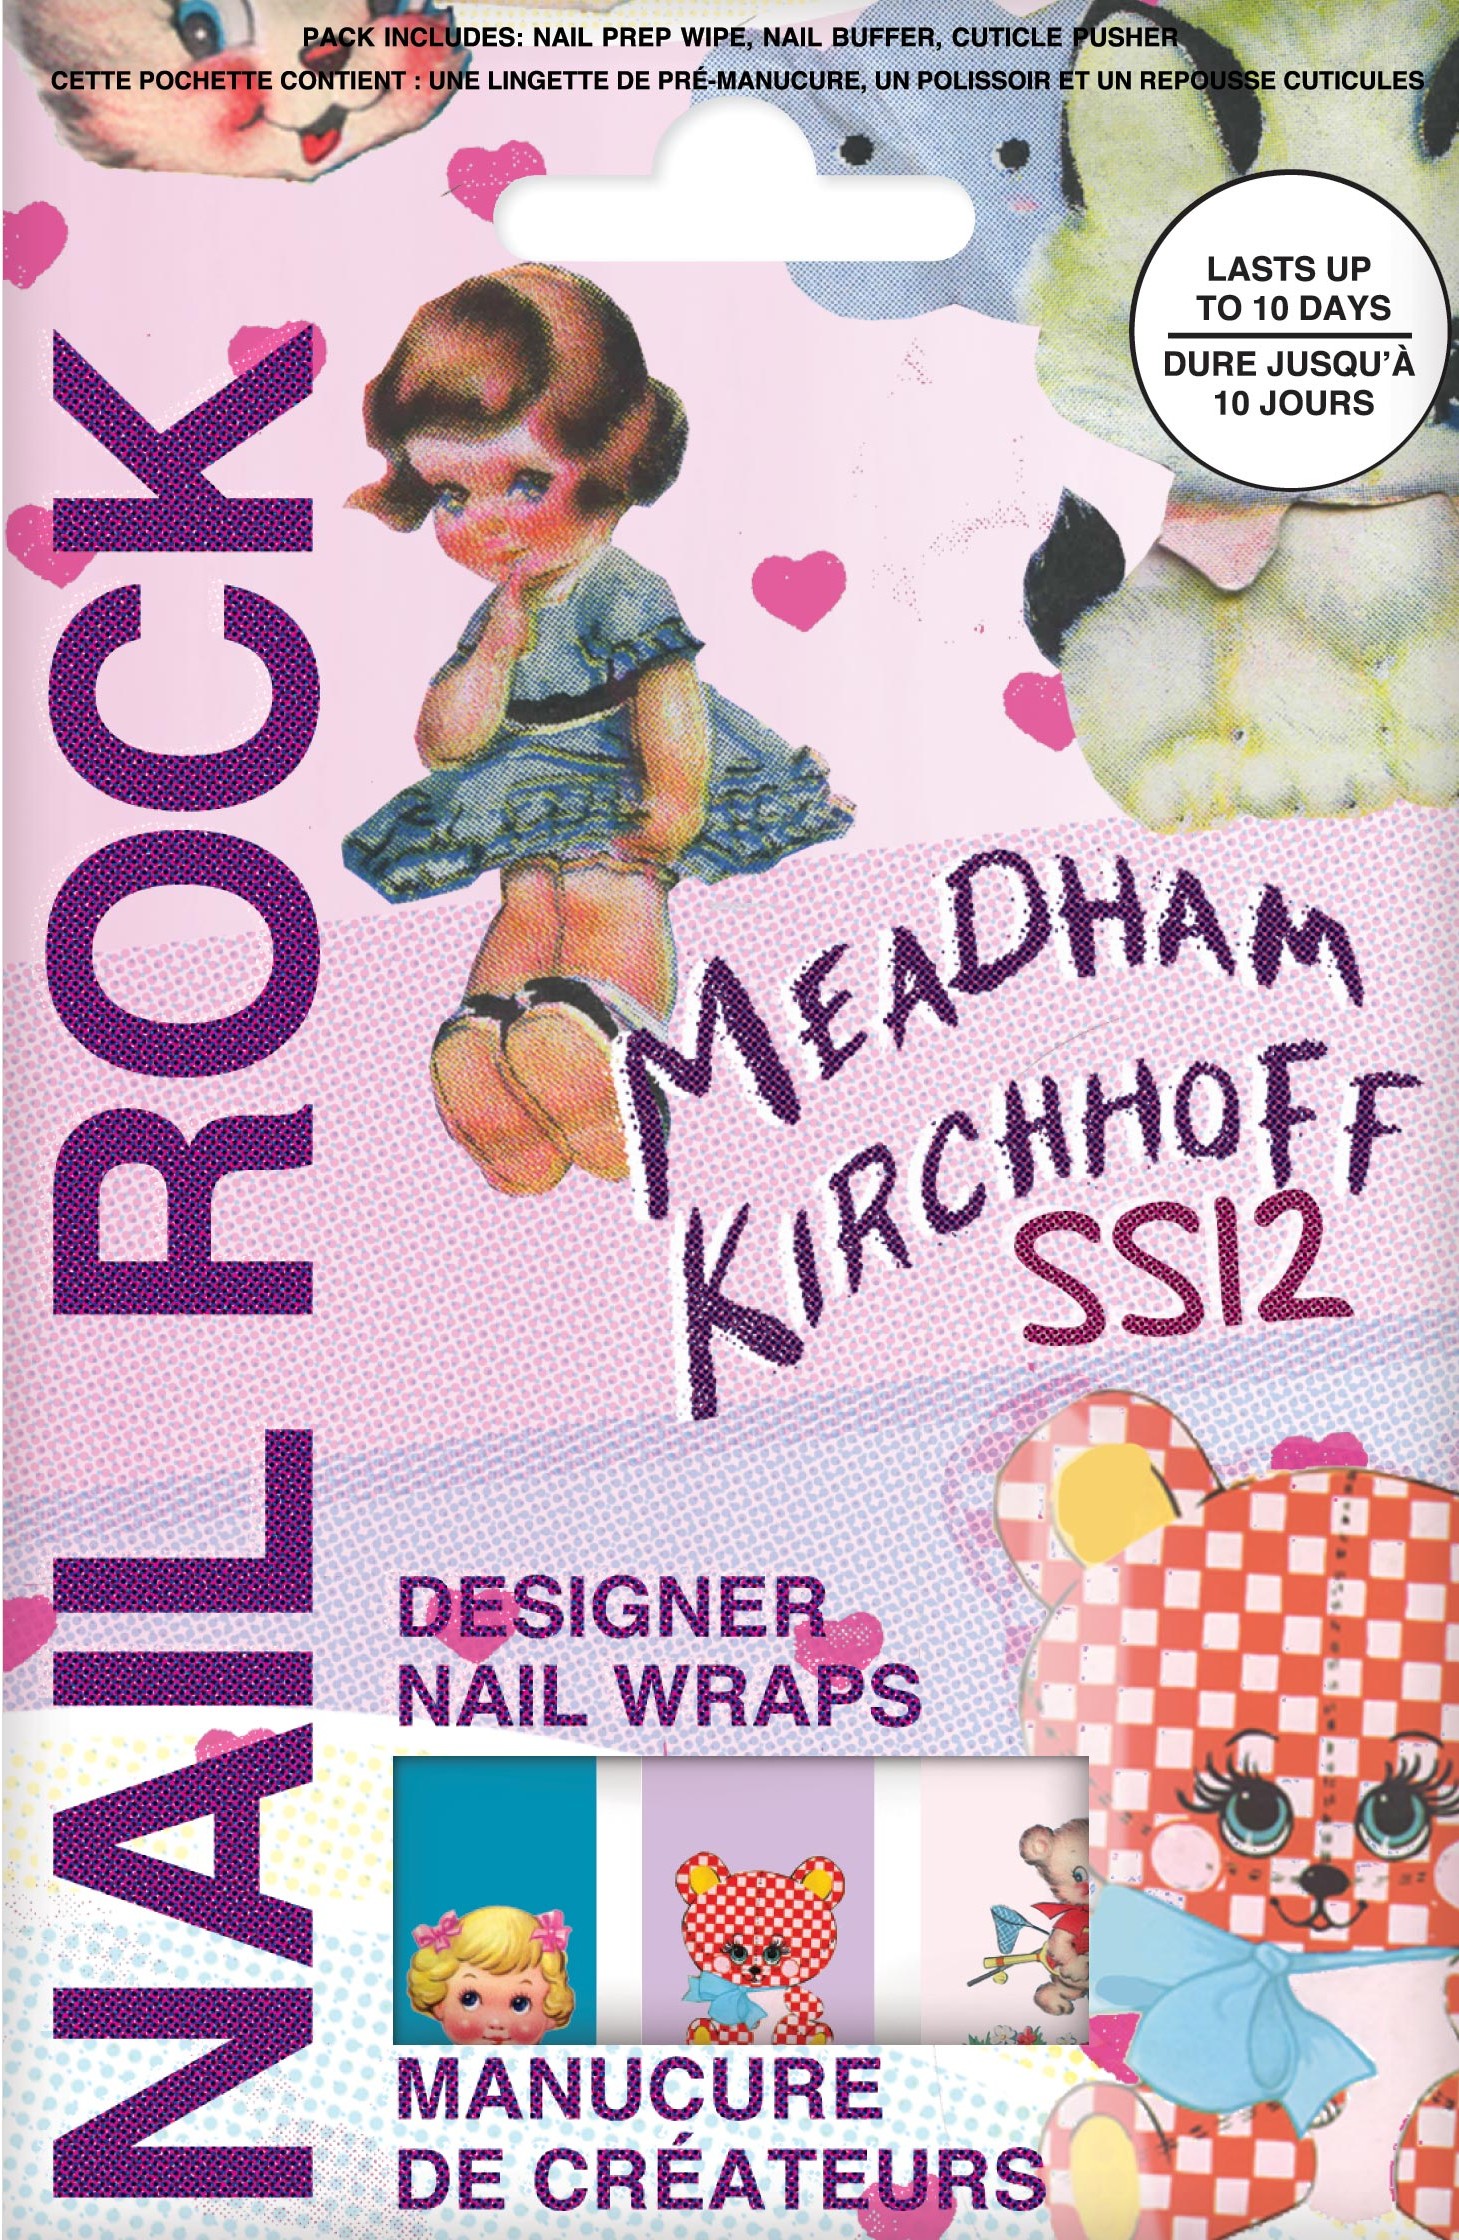 Nail Rock SS12: Meadham Kirchhoff - Exclusive to Topshop: £8